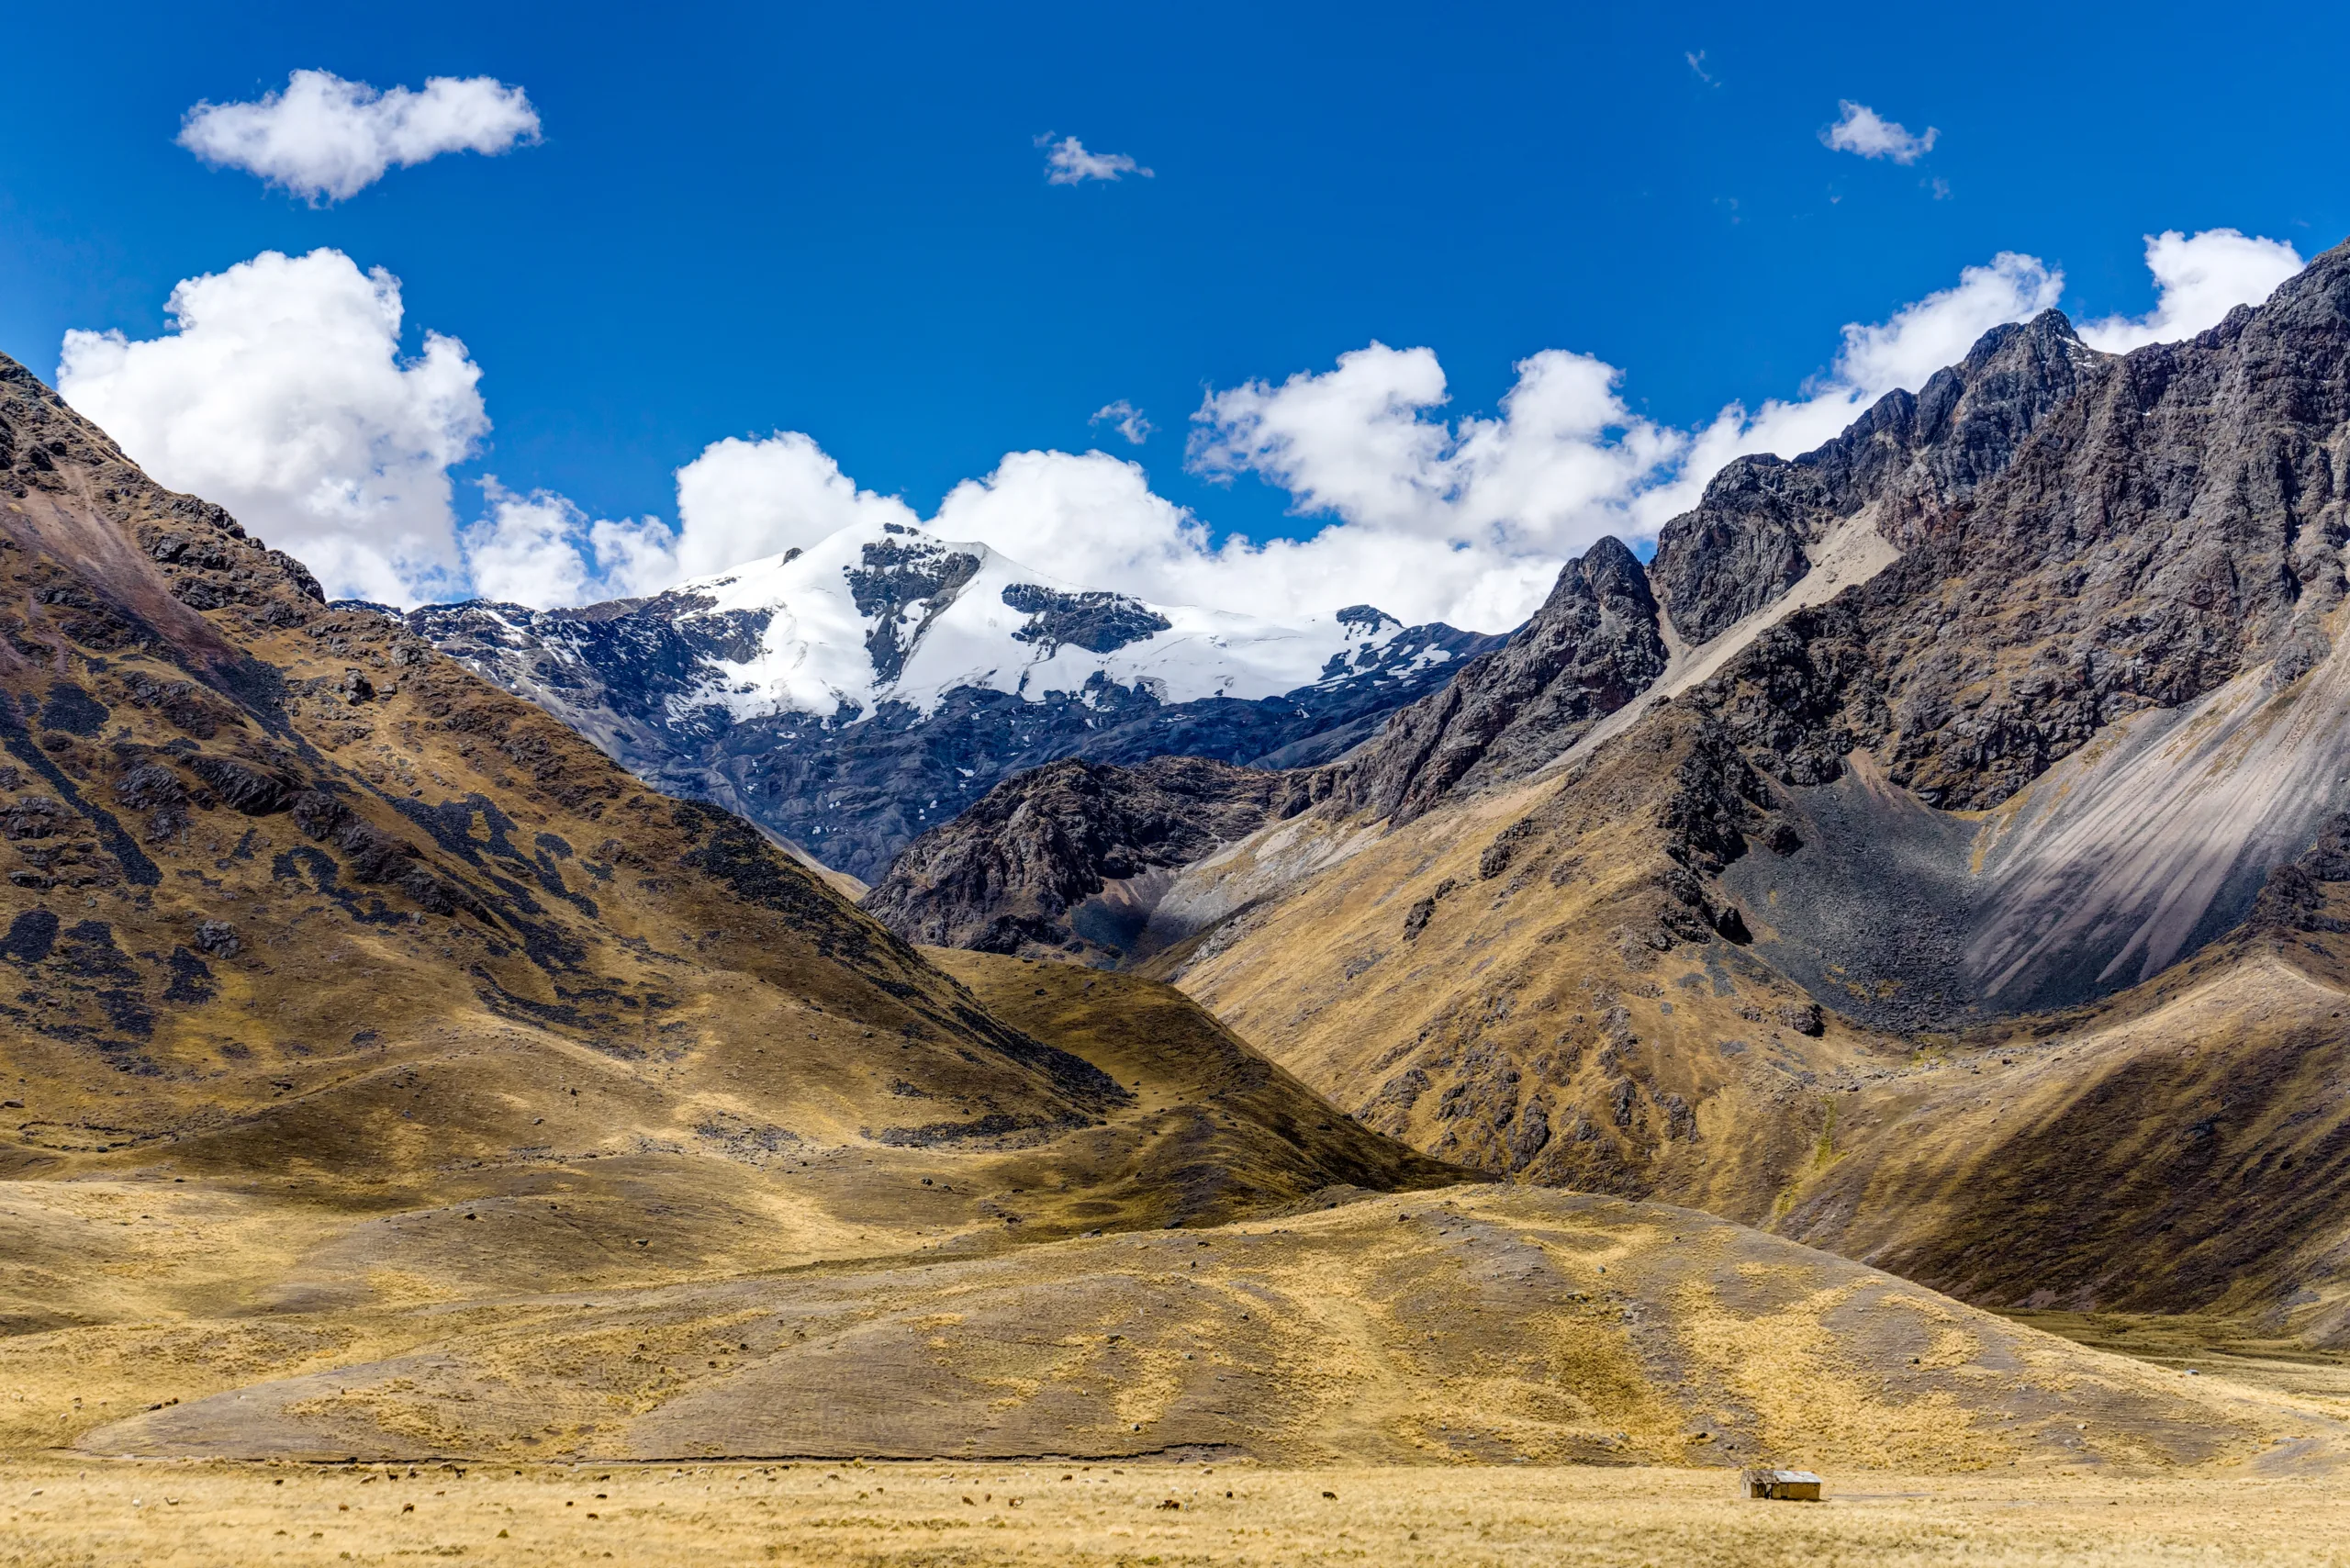 Peru Andes Mountain Scene Blue Sky And Clouds And Glacier